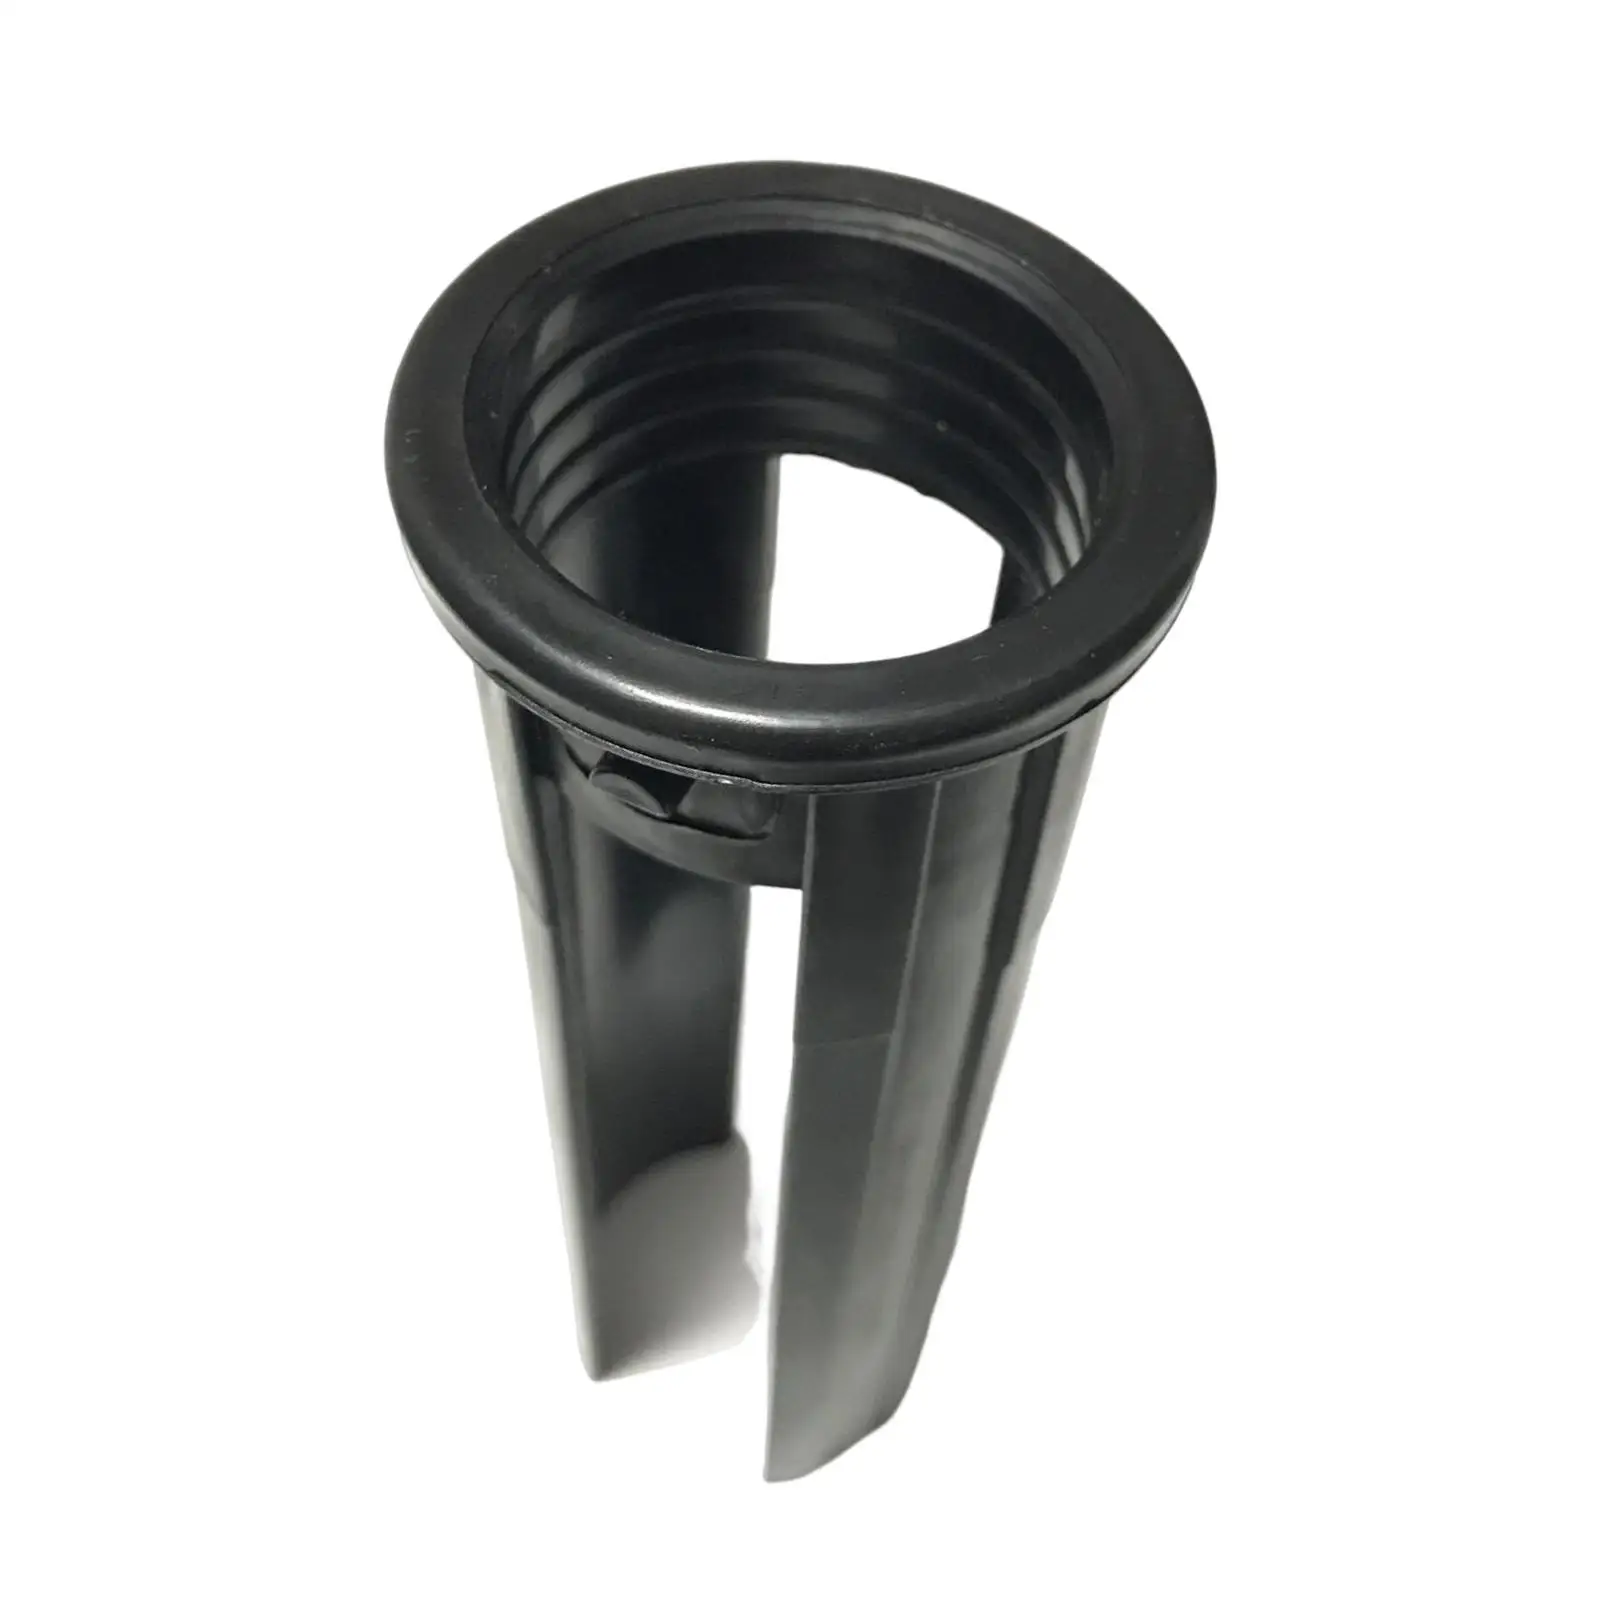 Hollow Pipe Bushing Fitness Equipment Accessories Middle Sleeve Tube Plug Variable Diameter Sleeve Adapter Sleeve for Practice